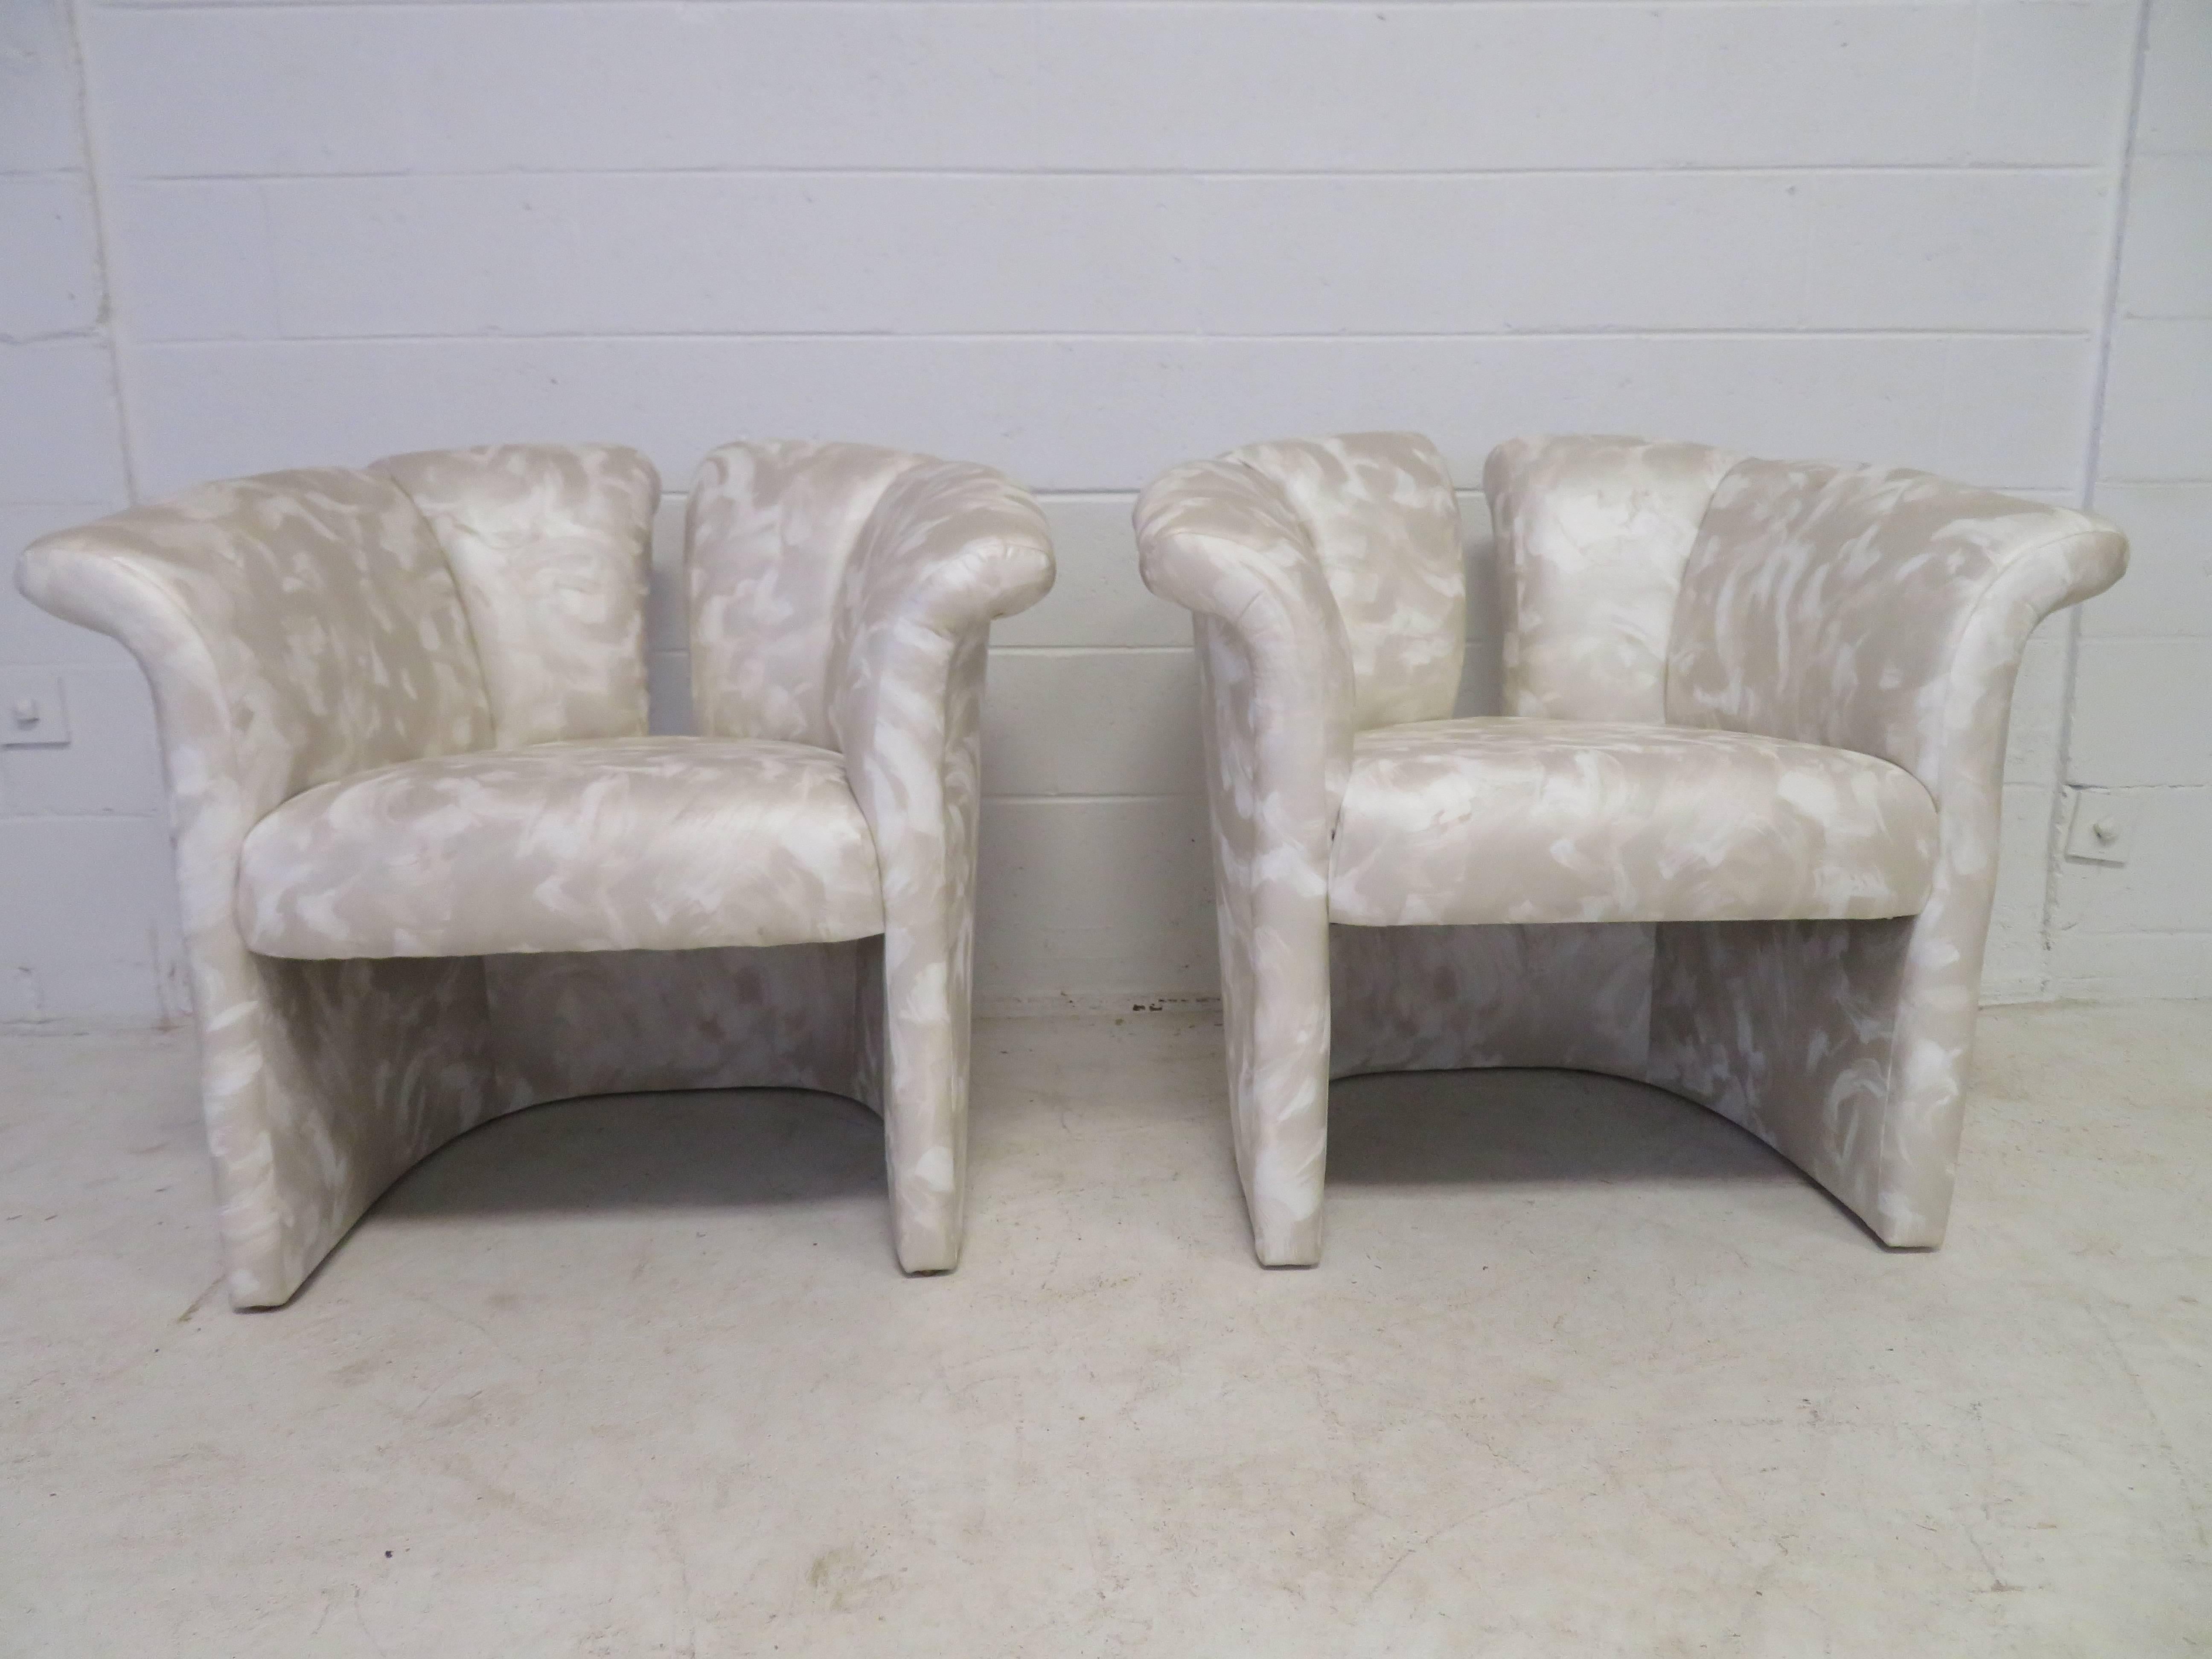 Pair of Signed Milo Baughman Barrel Back Lounge Chairs, Mid-Century Modern 2